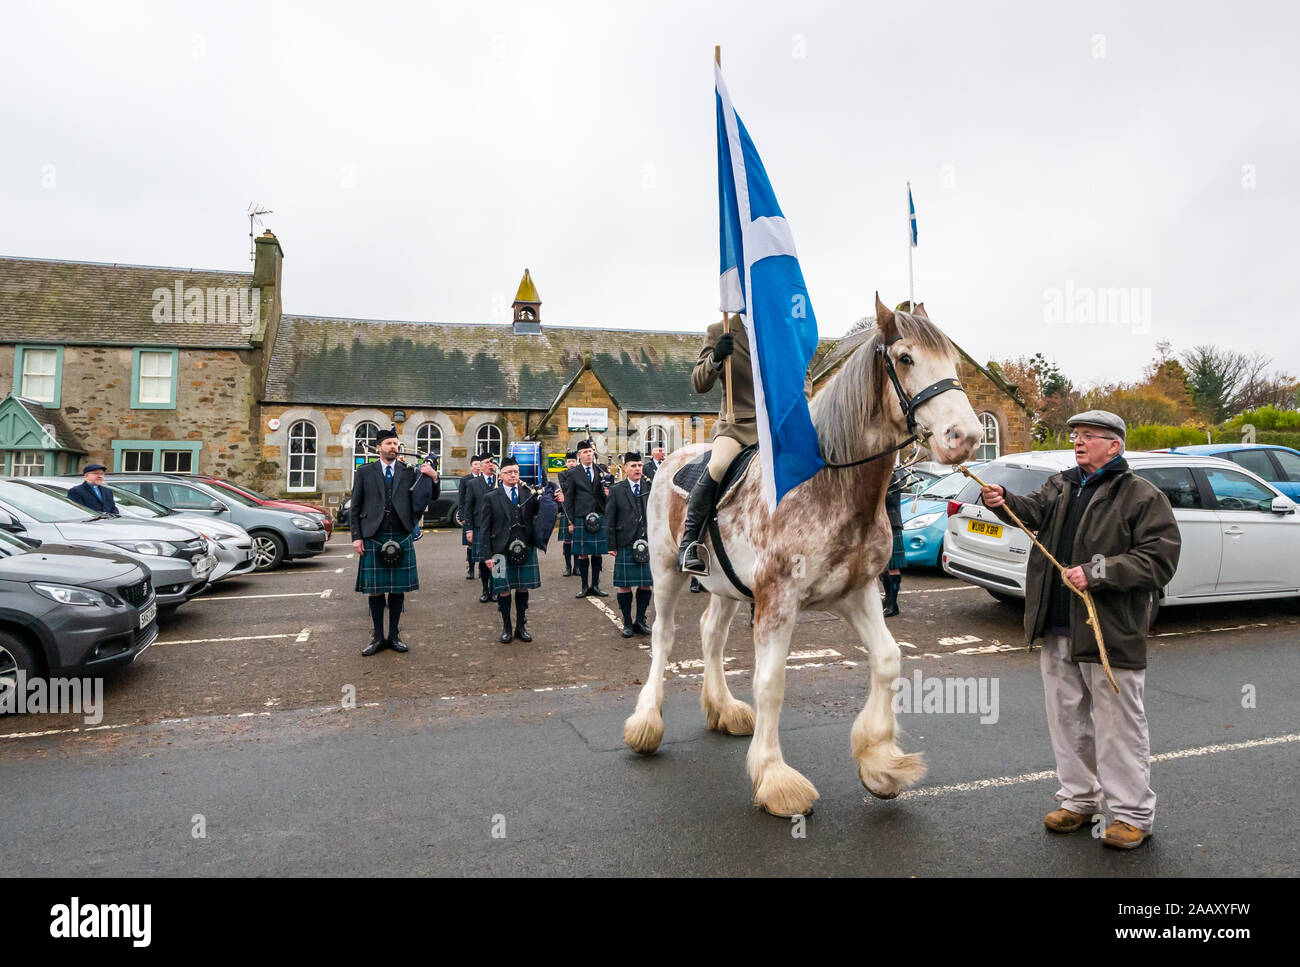 Athelstaneford, East Lothian, Scotland, UK. 24 November 2019. Saltire Festival: The first day of the annual festival to mark St Andrew’s Day takes place in the birthplace of the Scottish national flag where the saltire appeared in the sky as a good omen when the Picts & Scots defeated the Saxons led by Athelstan. Pictured: Craig Donnelly on a Strawberry Roan Clydesdale mare with groom/owner Arthur Greenan with Haddington Pipe Band Stock Photo